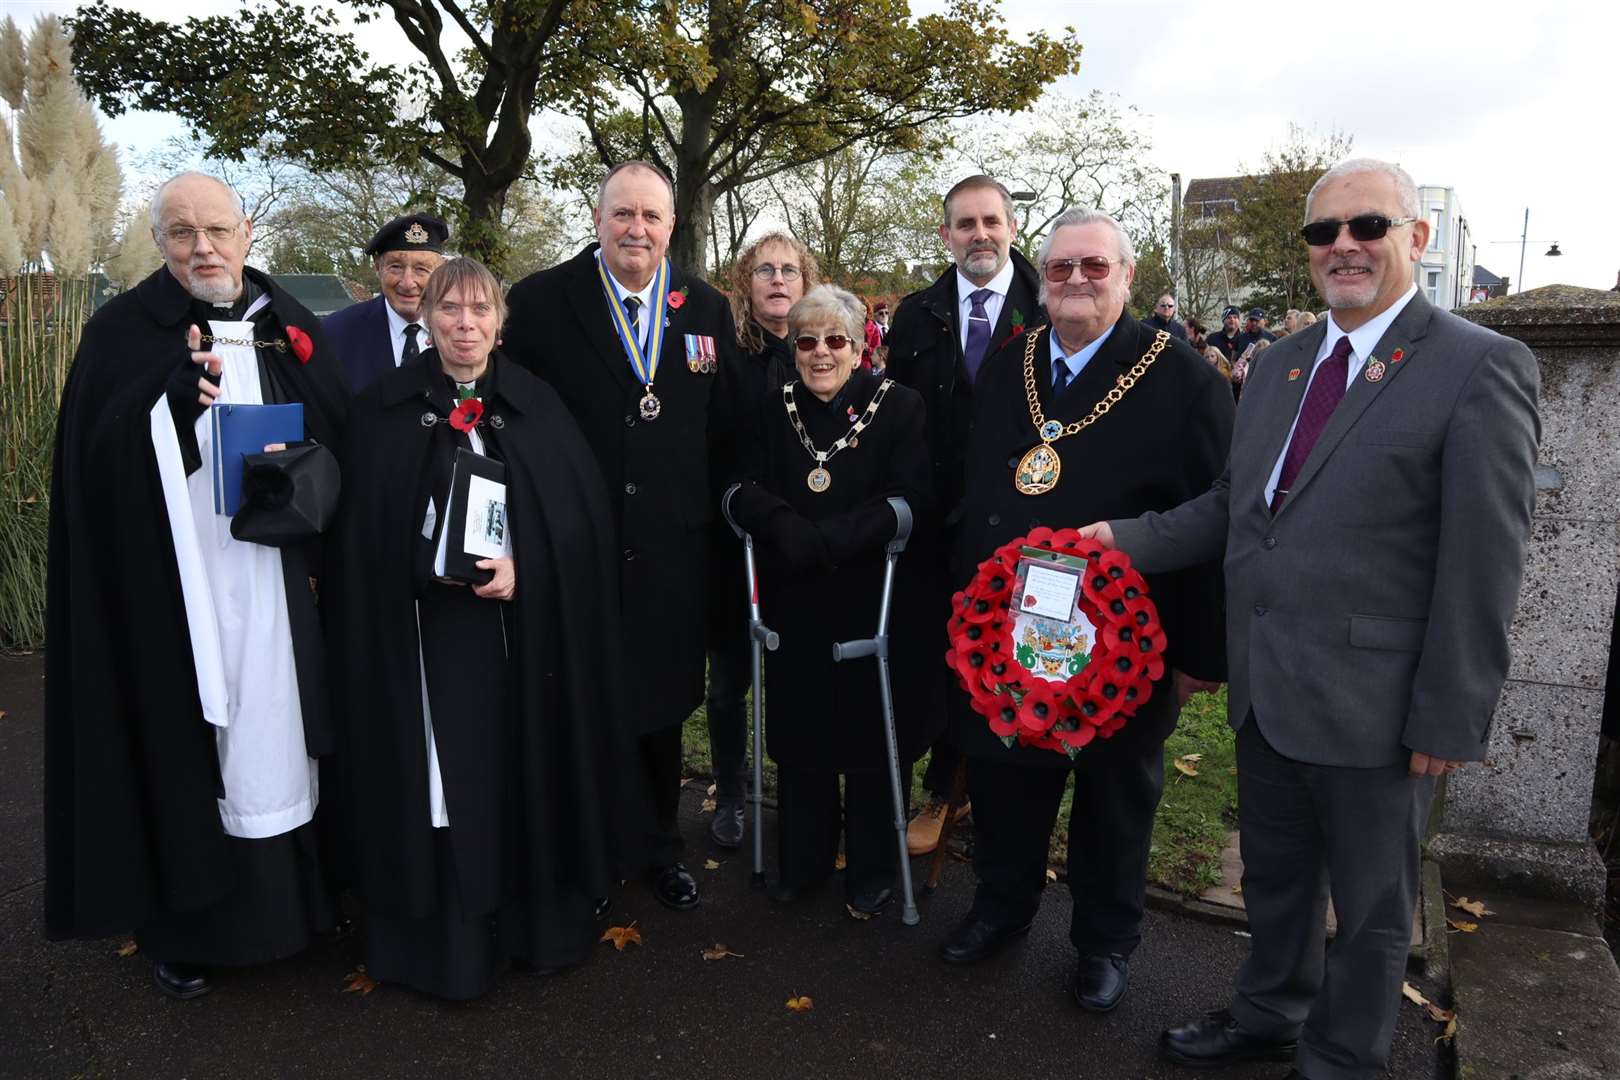 Swale Mayor Cllr Ken Ingleton with his mayoress Mick with the Revs Colin Johnson and Jeanette McLaren, Royal Briitish Legion preisident Ian Goodwin and Sheerness town council chairman Matt Brown at the Sheerness Remembrance Sunday service (21306156)